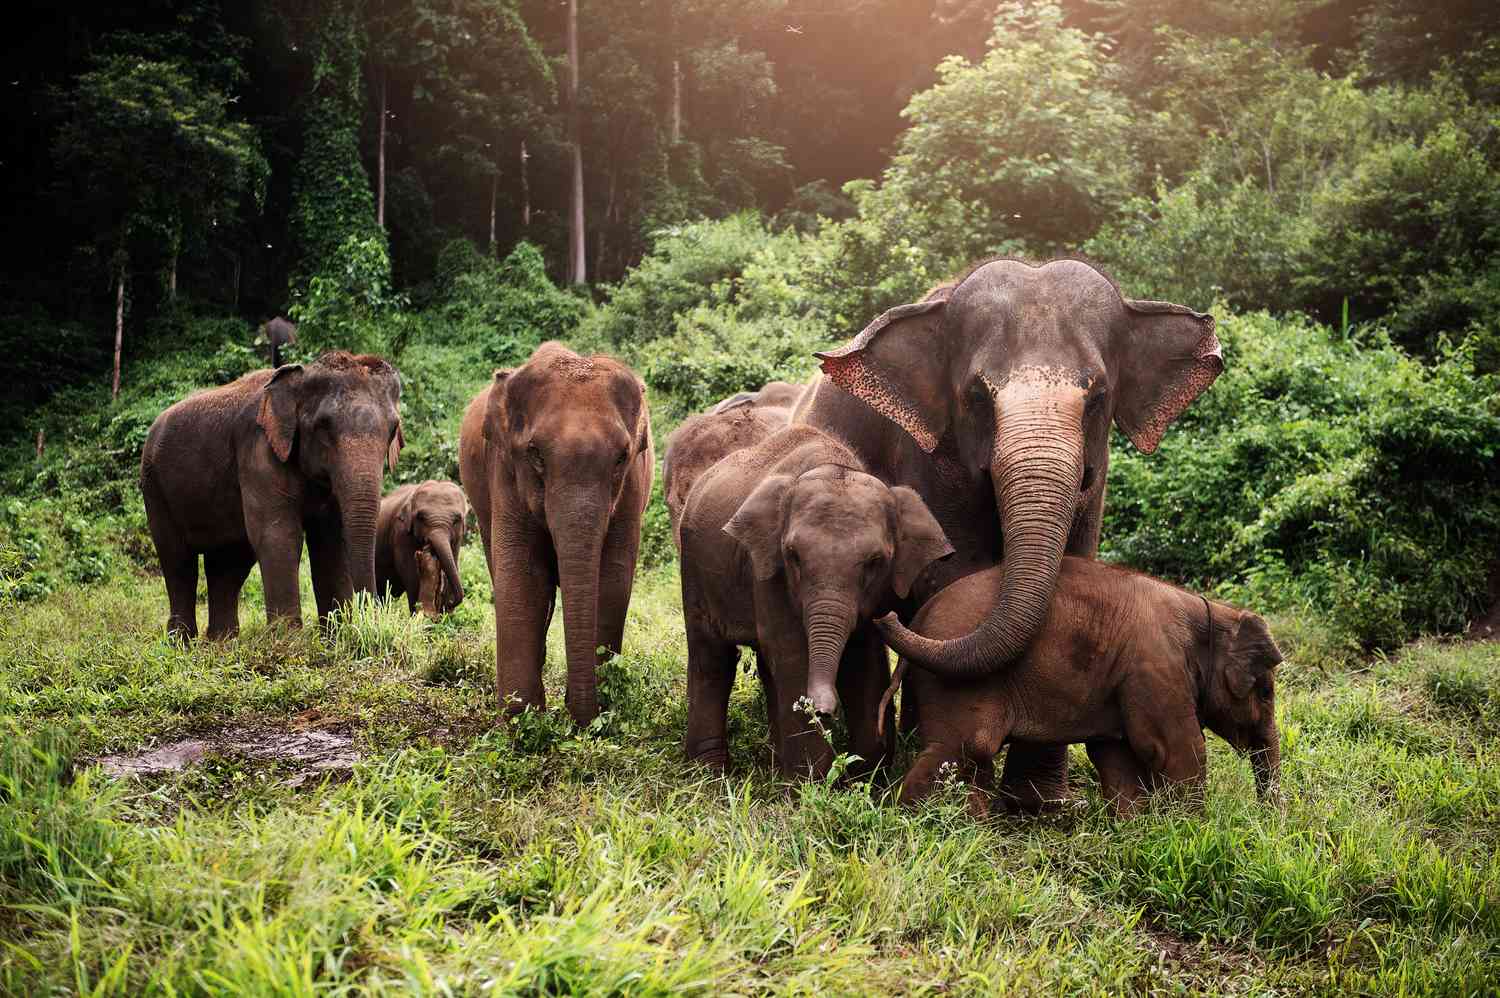 Elephants Have Lost Nearly Two-Thirds of Their Habitat Across Asia